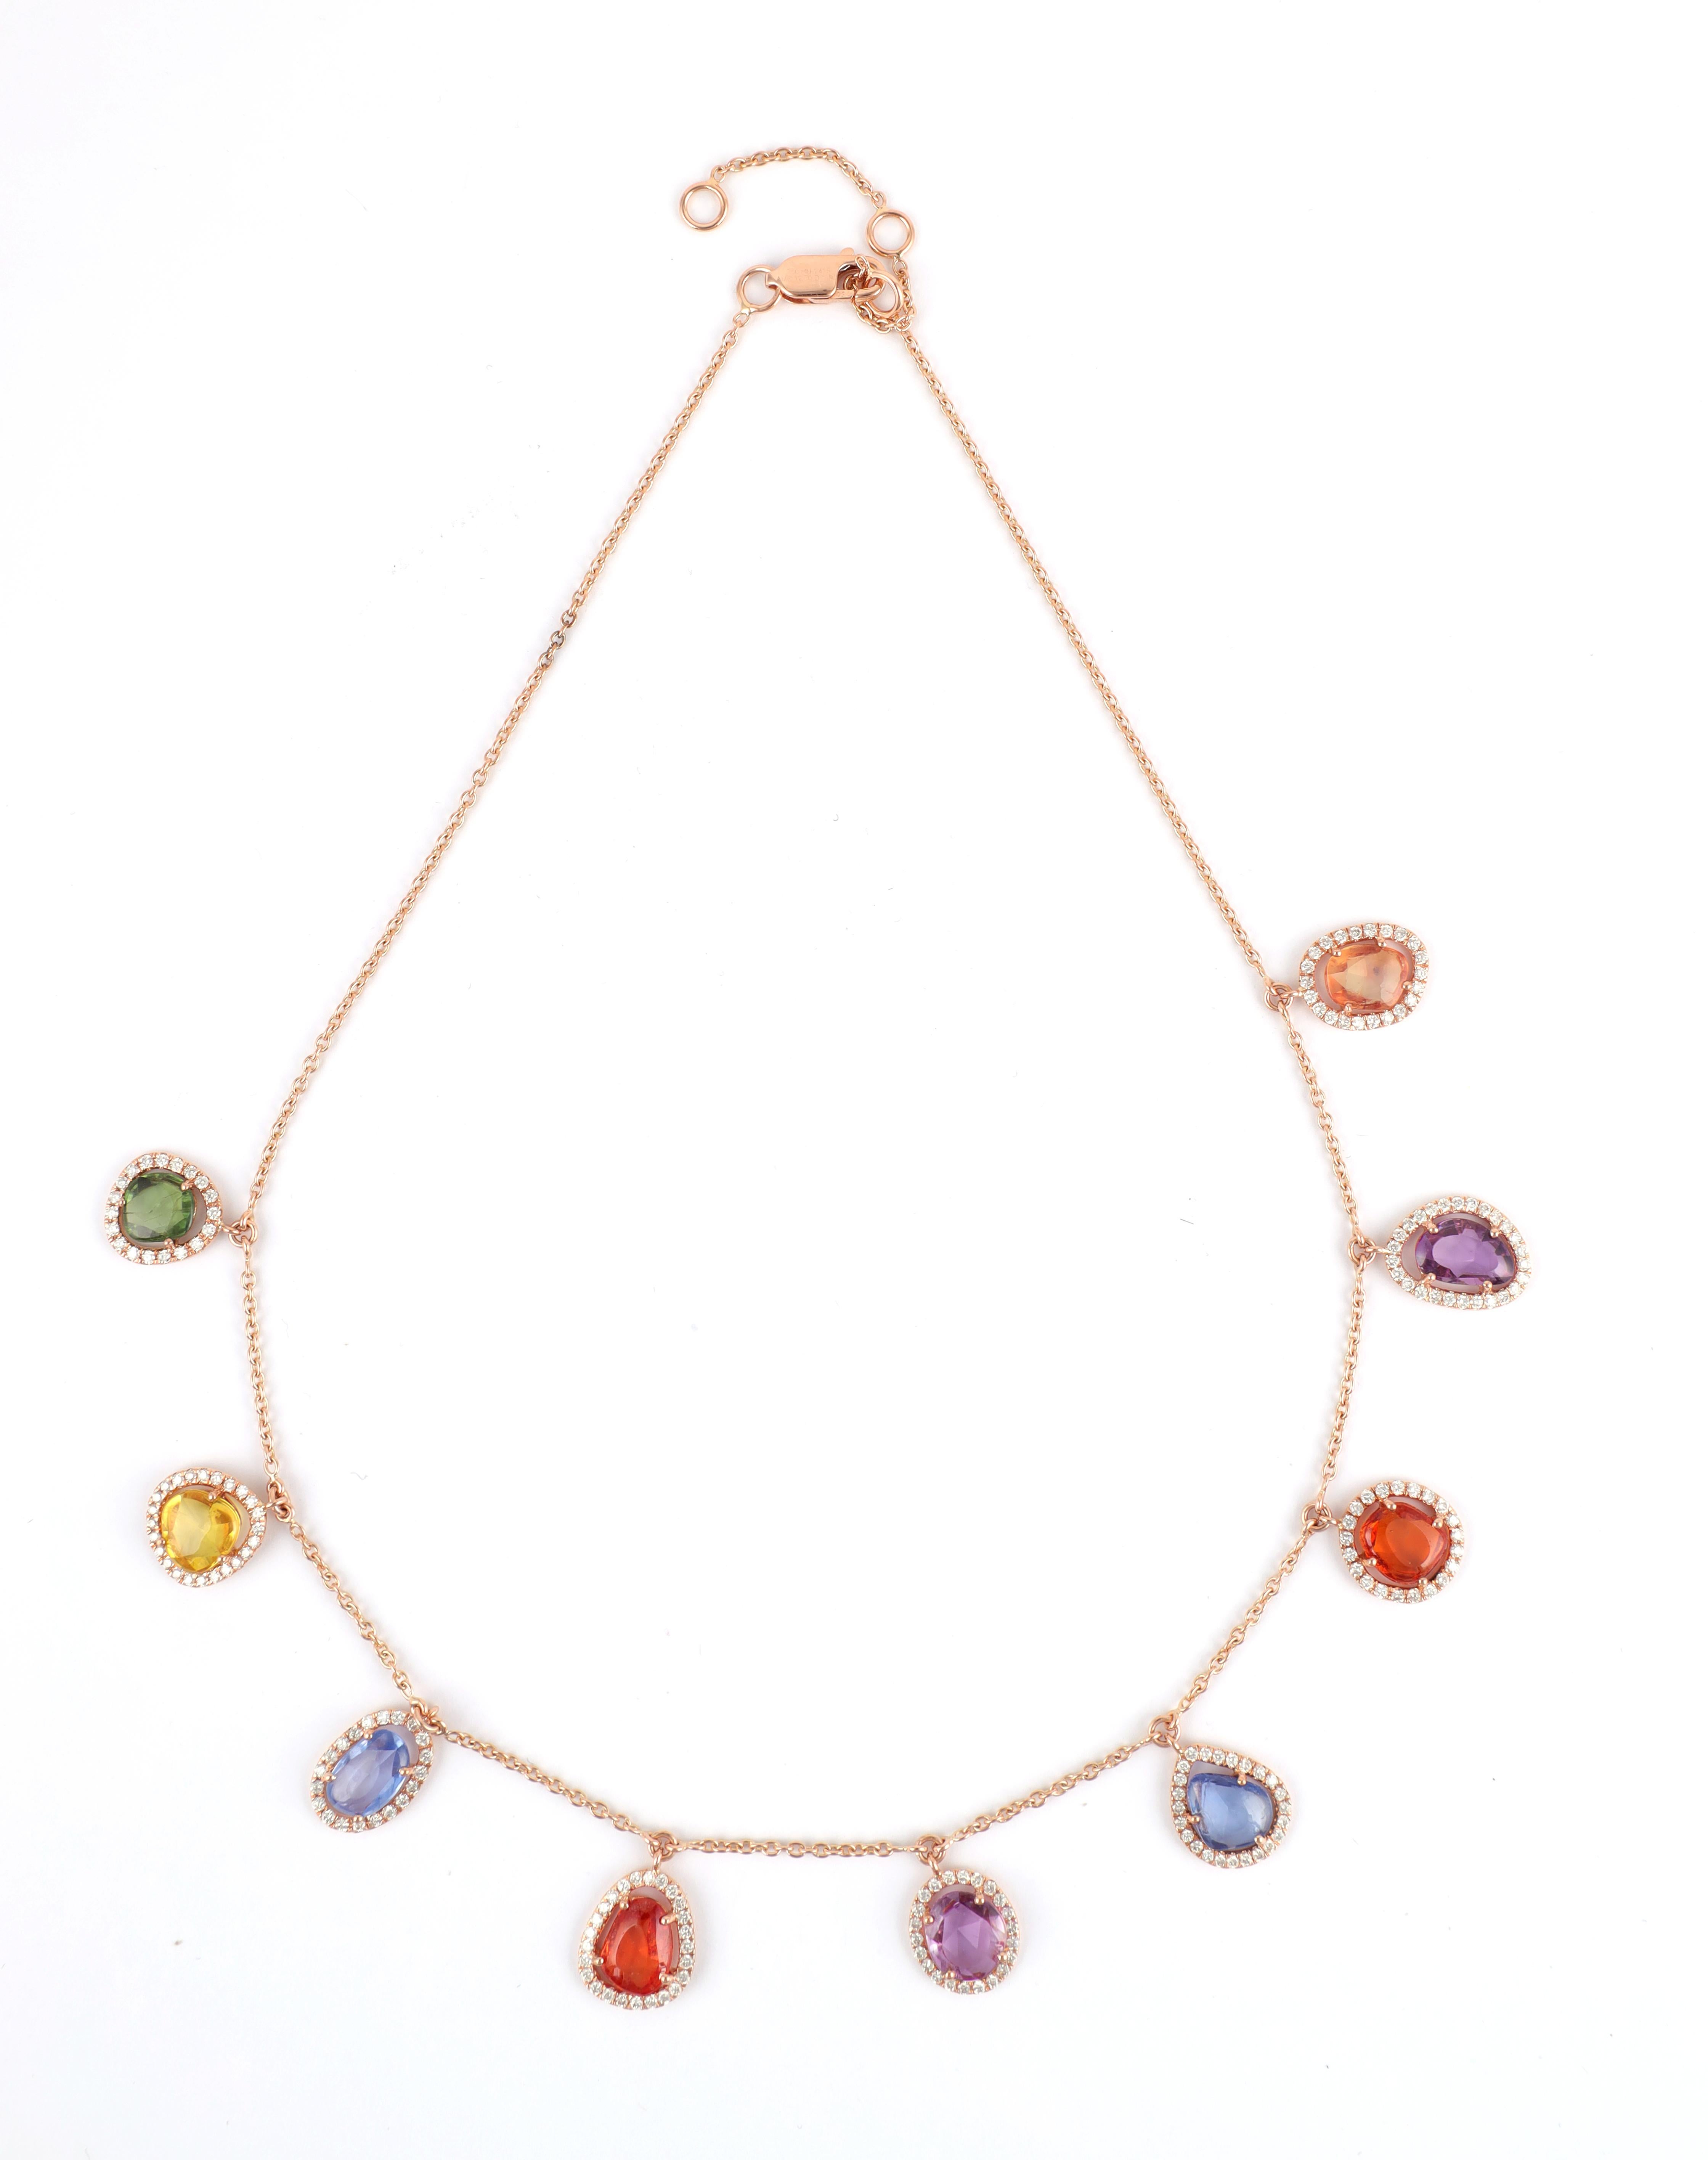 Cabochon 12.70 Carat Multi-Colors Rainbow Sapphires & Diamond Chain Necklace in 18k Gold For Sale